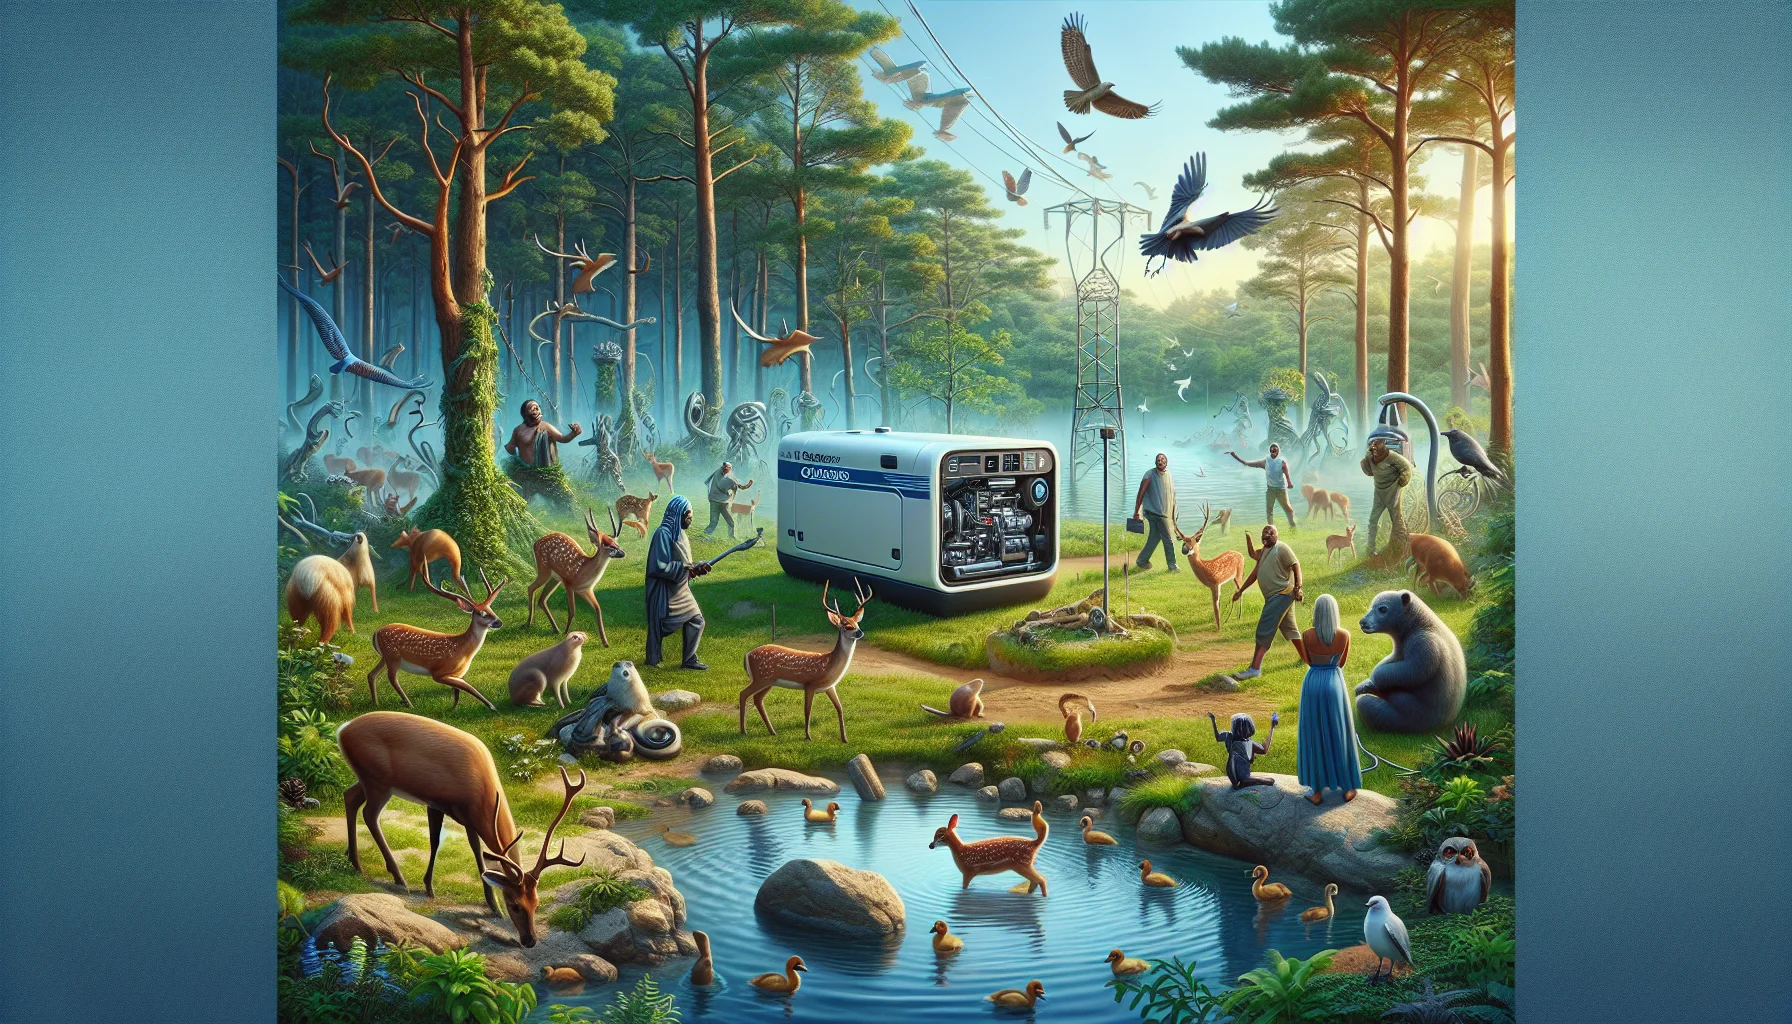 Visualize a bizarre and amusing scene based around the concept of generating electricity. The centerpiece of this scene is the quietest RV generator in the world. Imagine it advanced and futuristic, almost unnaturally silent. It is located in a breathtaking forest clearing by a tranquil lake, surrounded by curious animals like deer, rabbits, and birds that are seemingly undisturbed by its presence. A group of people, including a Caribbean descent woman, a Caucasian descent man, and a Middle-Eastern descent young adult, are left astounded and in fits of laughter by the unusual sight of animals being unphased by the generator. Ensure the atmosphere looks serene, harmonious, and eco-friendly to exhibit its quietness.